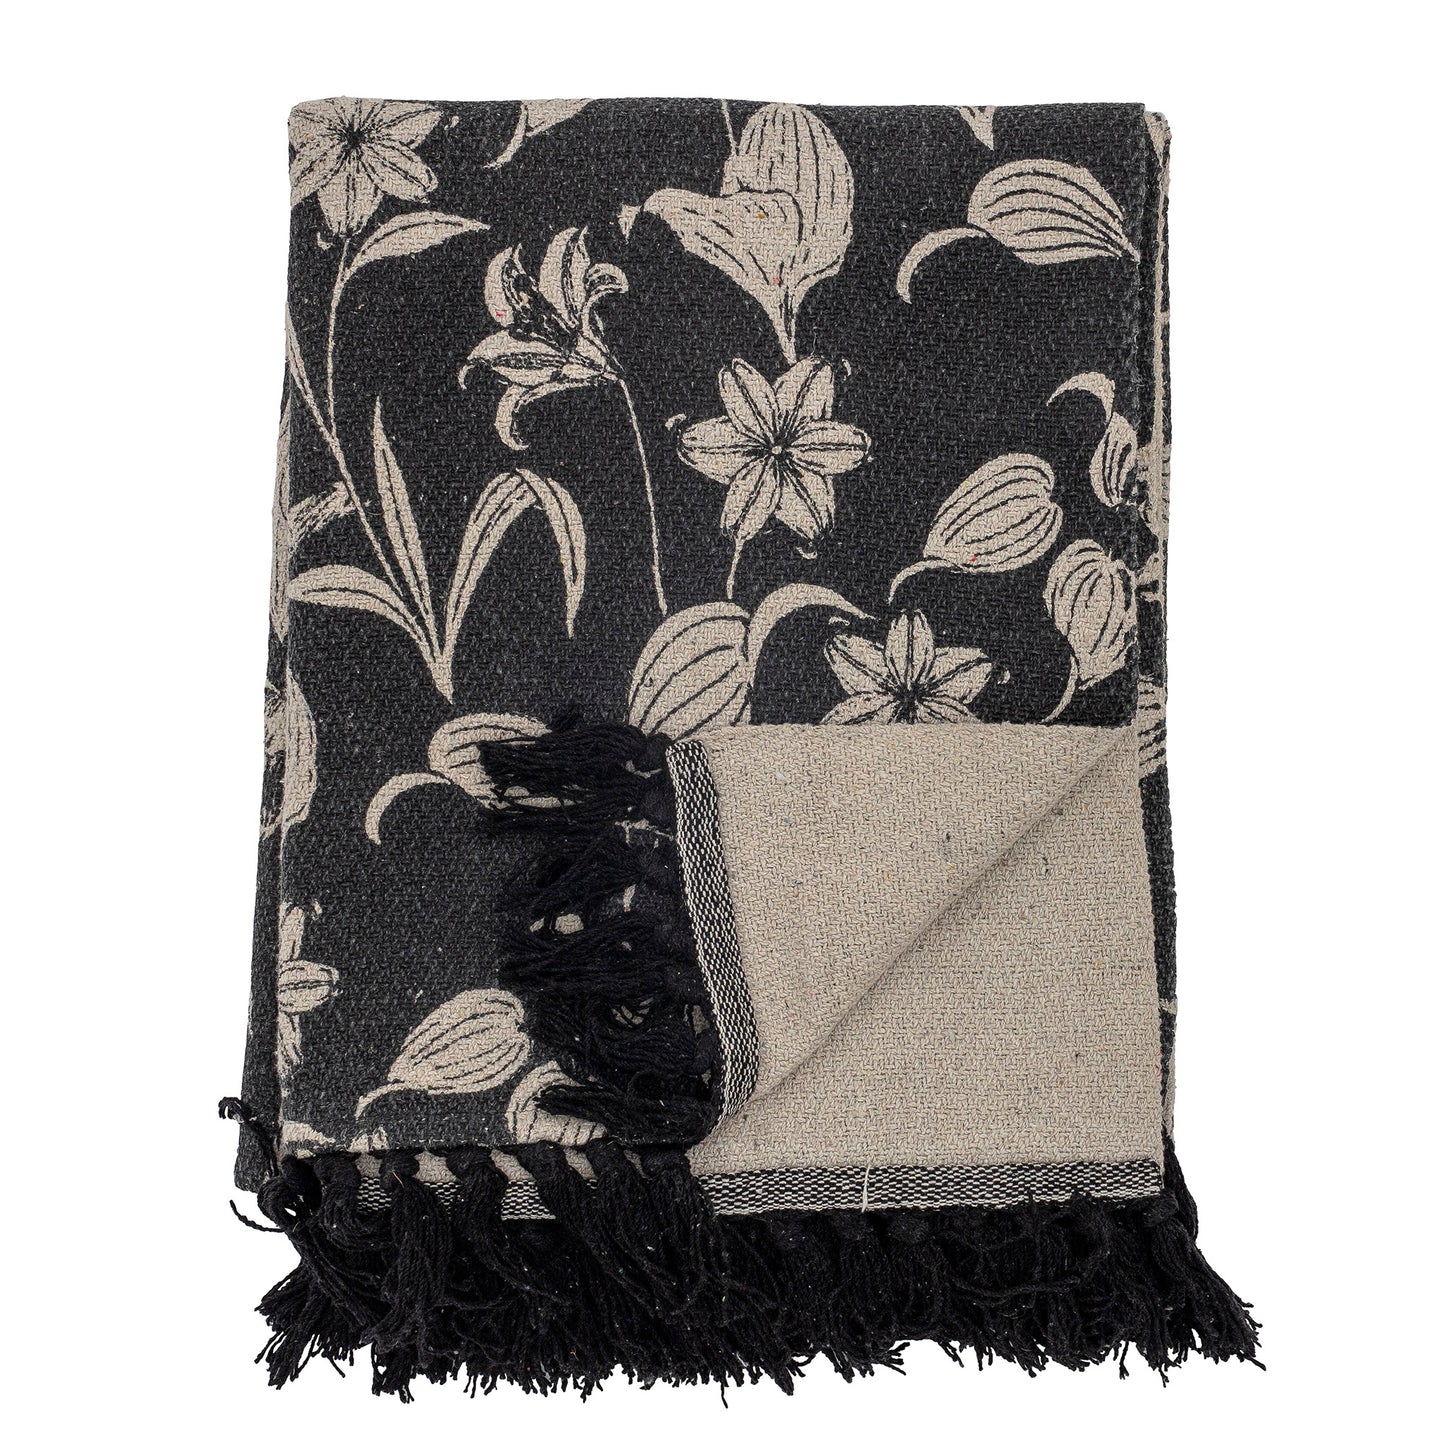 Mali Recycled Cotton Throw